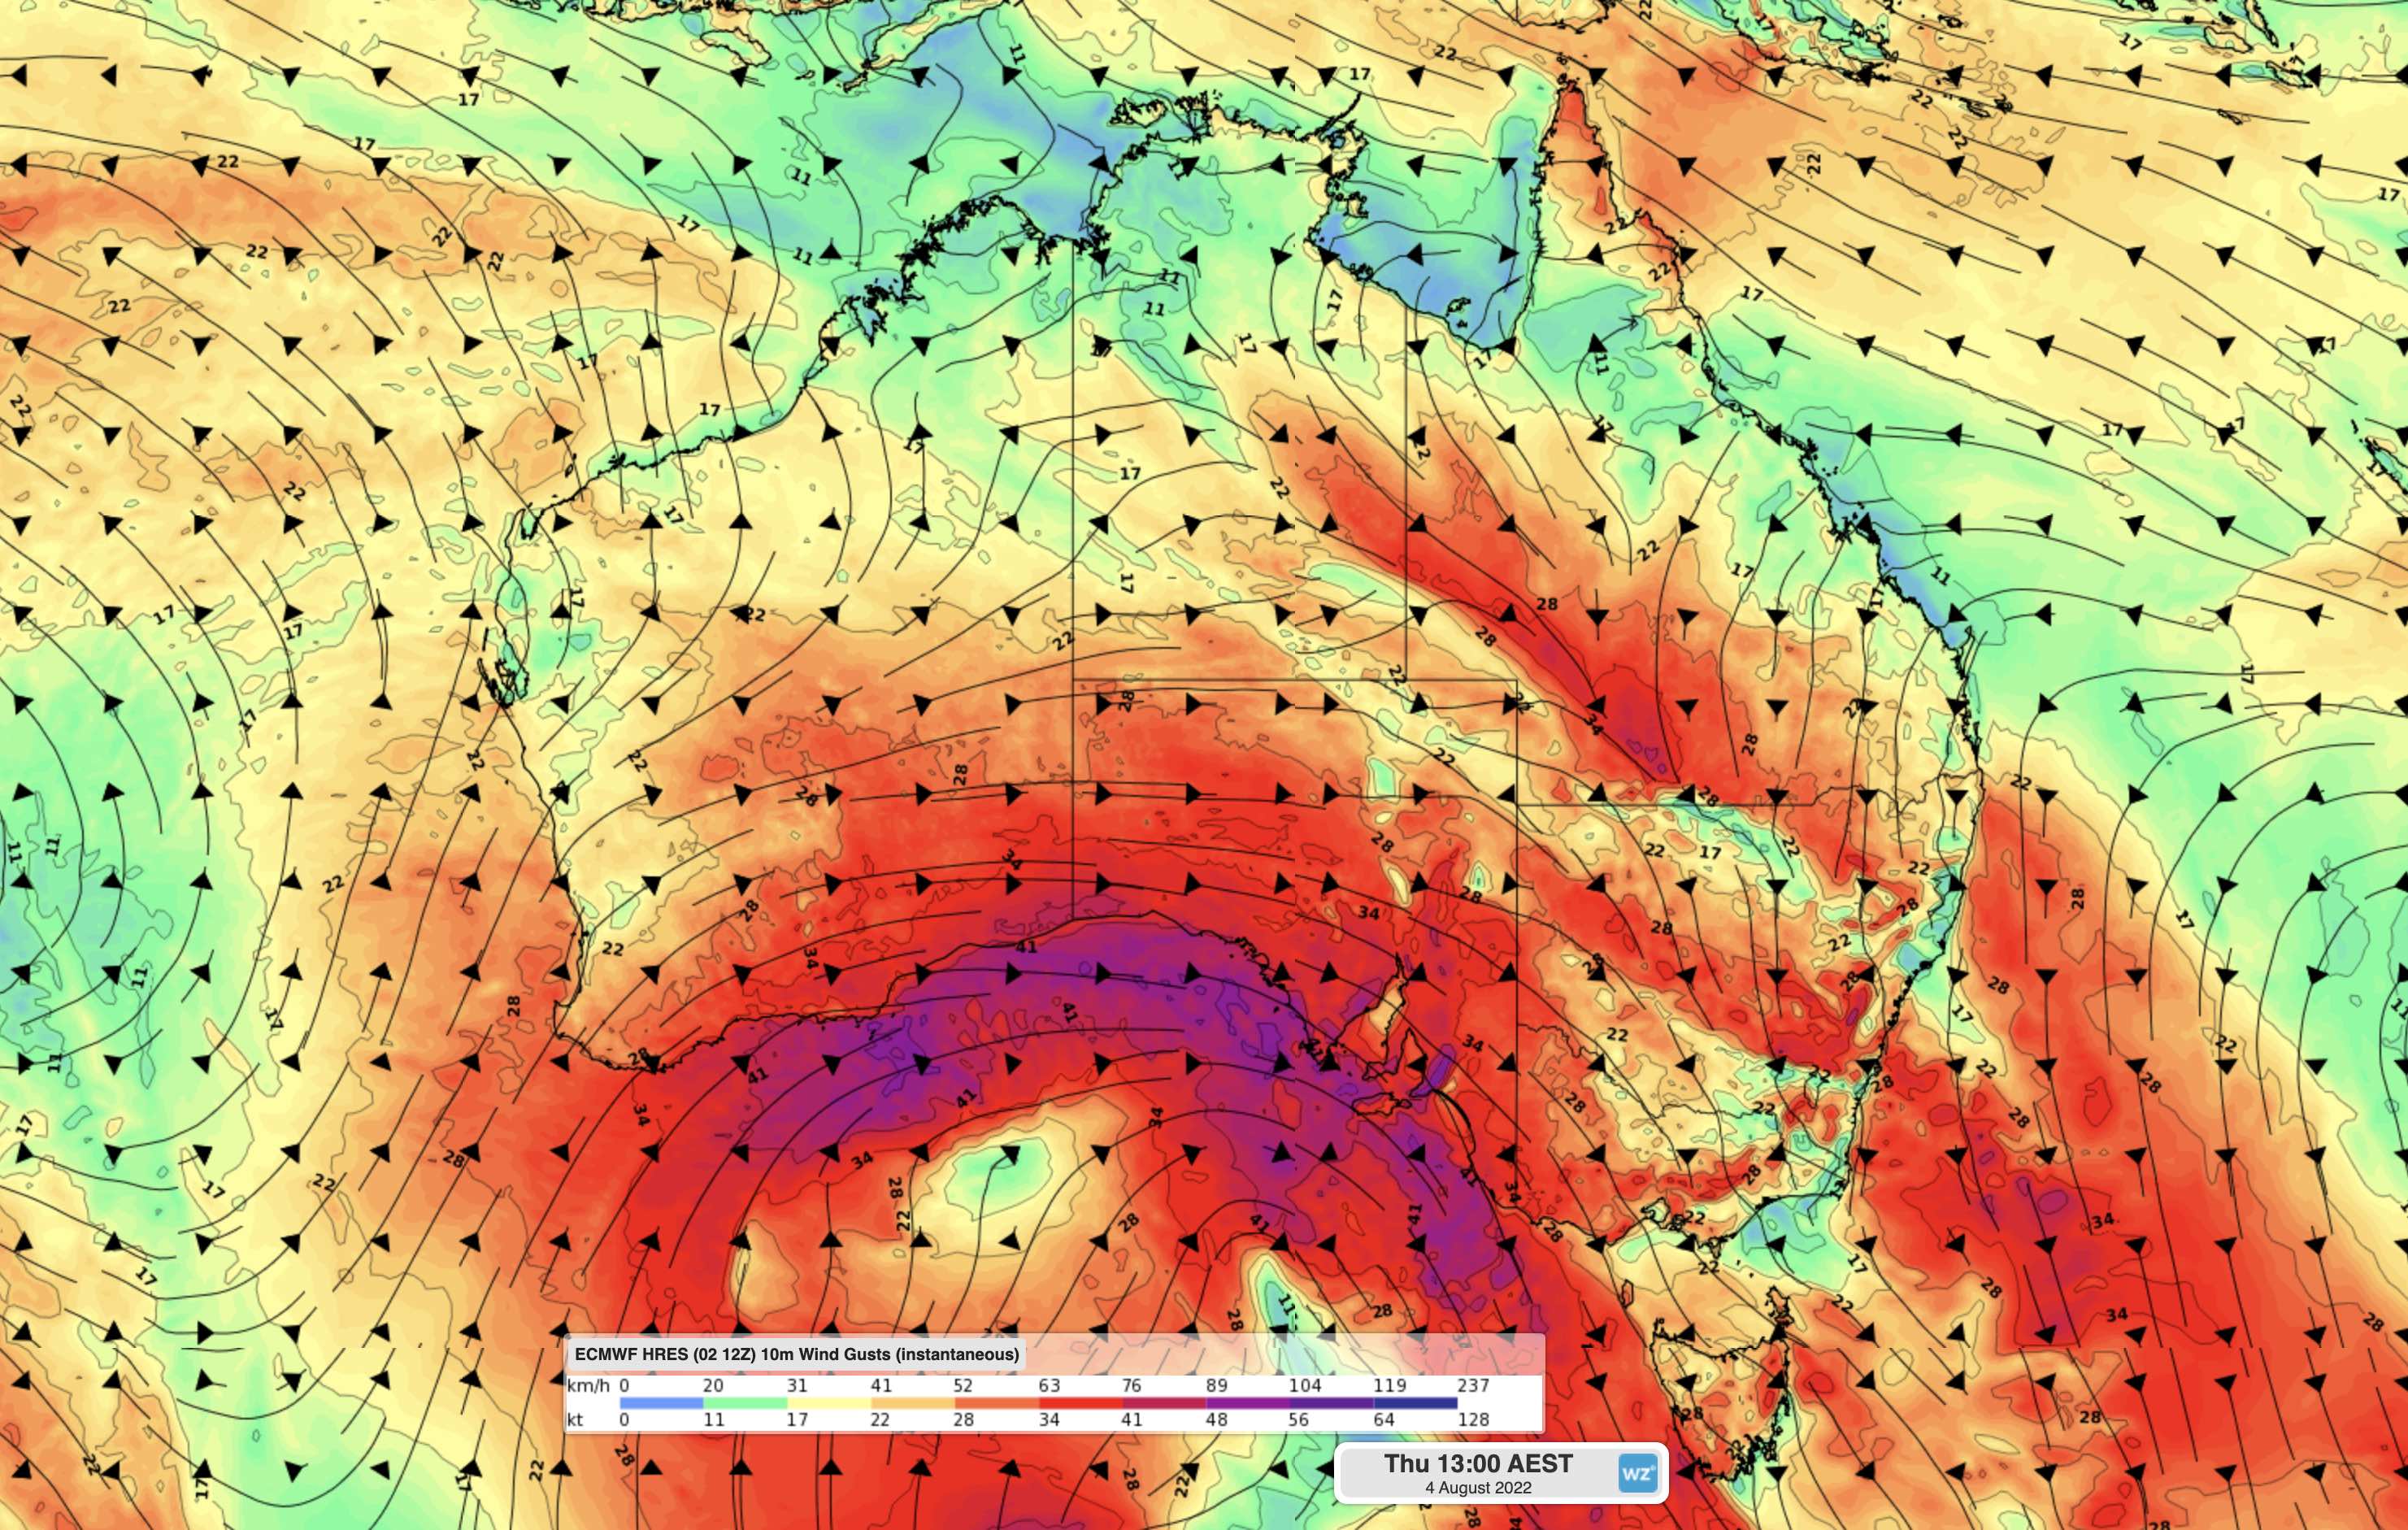 Forecast wind gust speed and direction at 1pm AEST on Thursday, according to the ECMWF-HRES model.